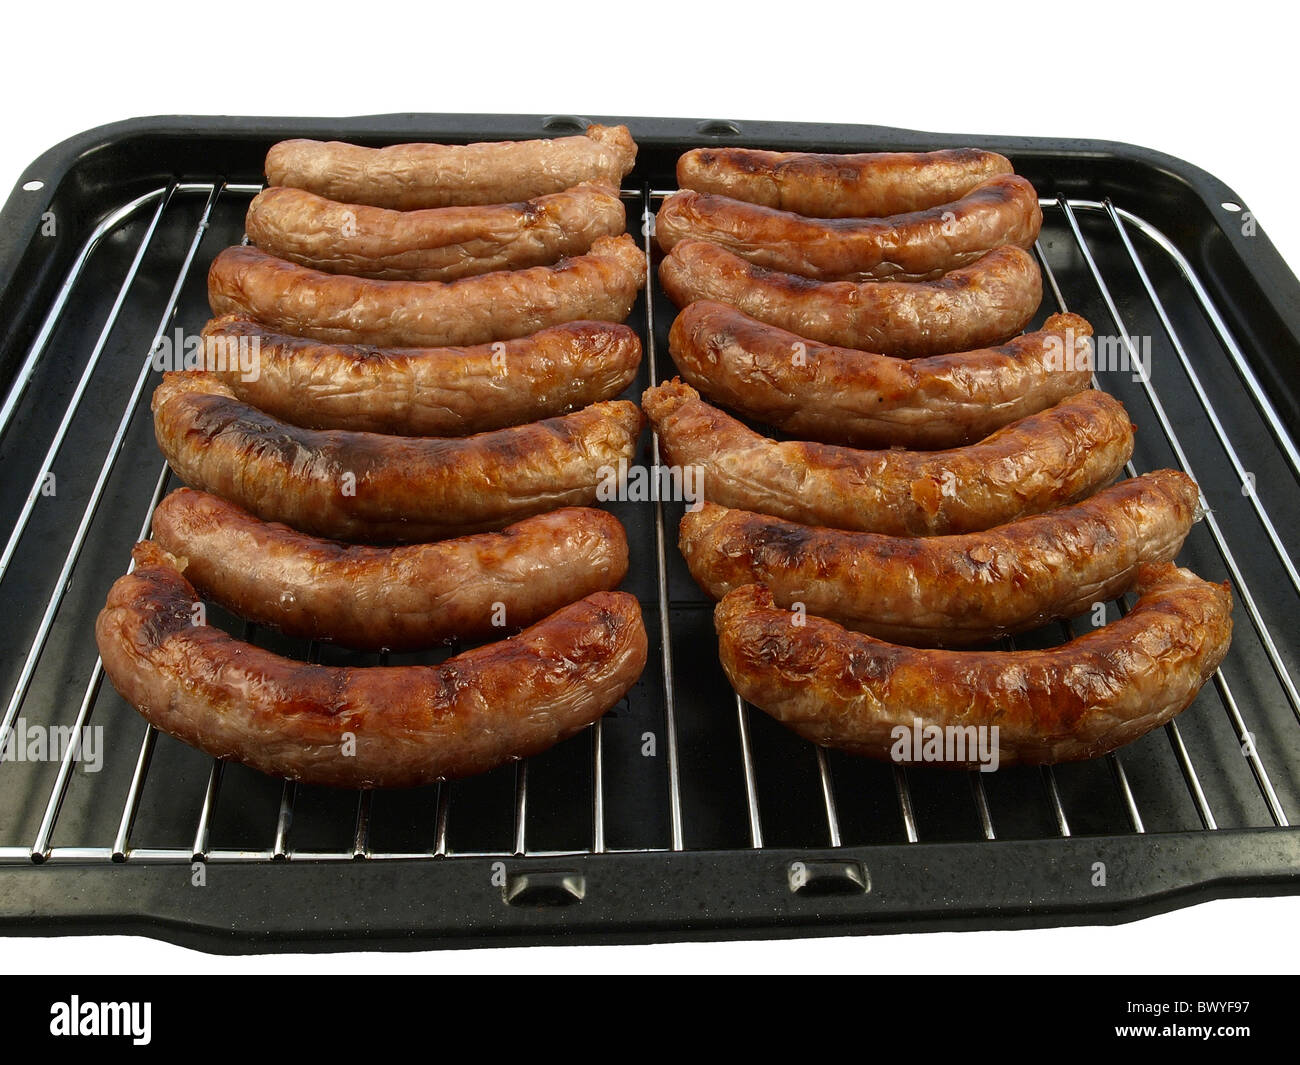 A grill pan of cooked pork sausages - isolated on white Stock Photo